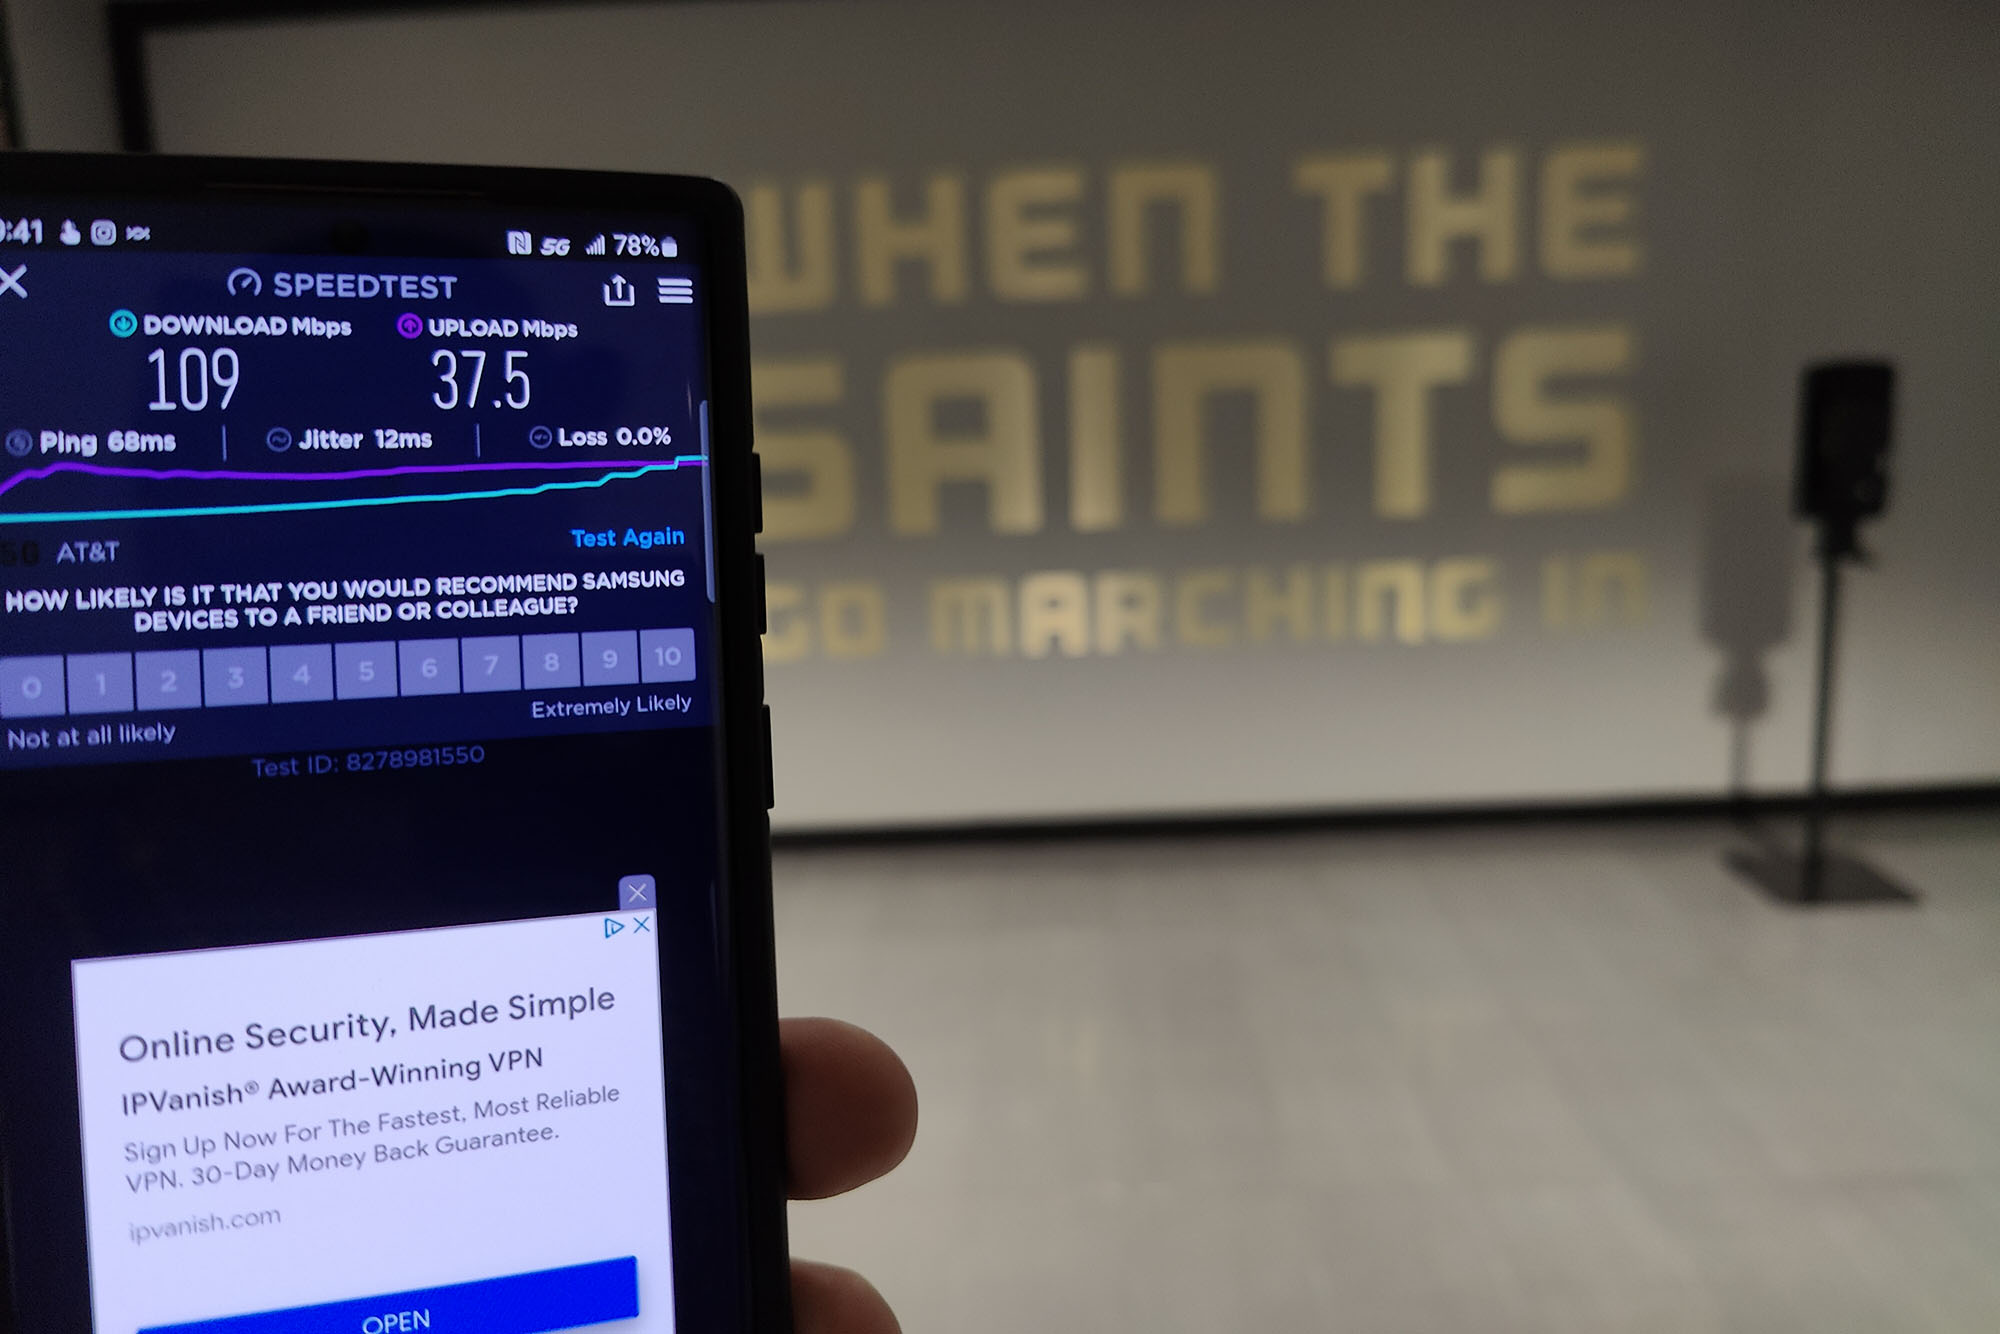 5G test with the Saints logo in the background.